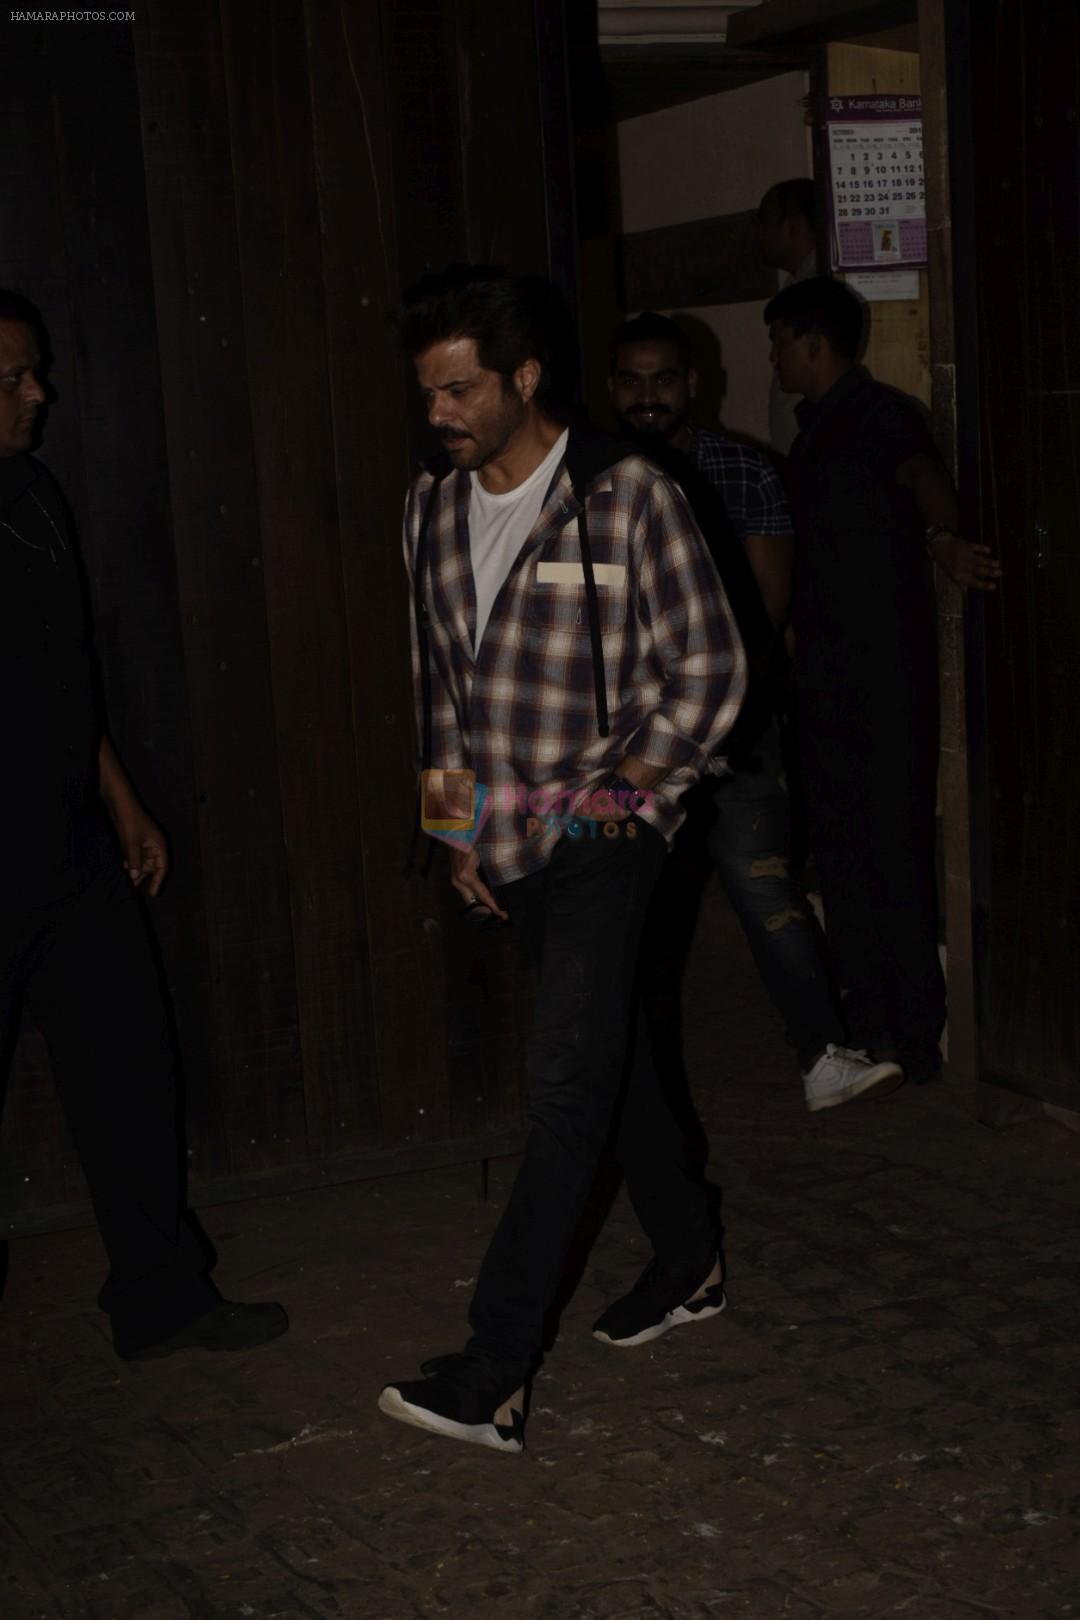 Anil Kapoor spotted at Anil Kapoor's house for Karvachauth celebration in Juhu on 27th Oct 2018